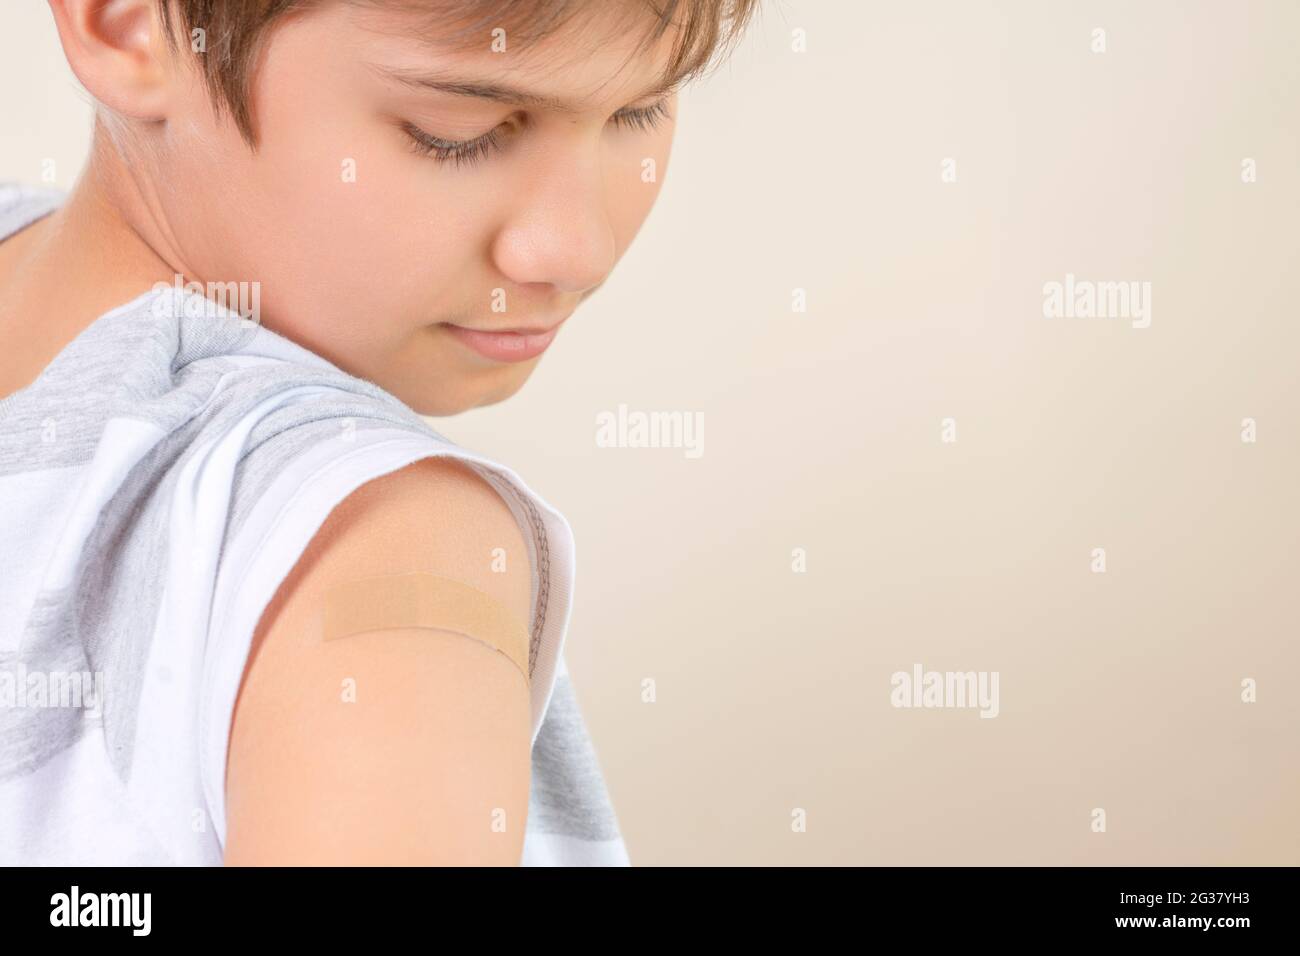 Teenage boy with adhesive bandage plaster on his arm after vaccination. Injection covid vaccine, healthcare for children and teenagers Stock Photo